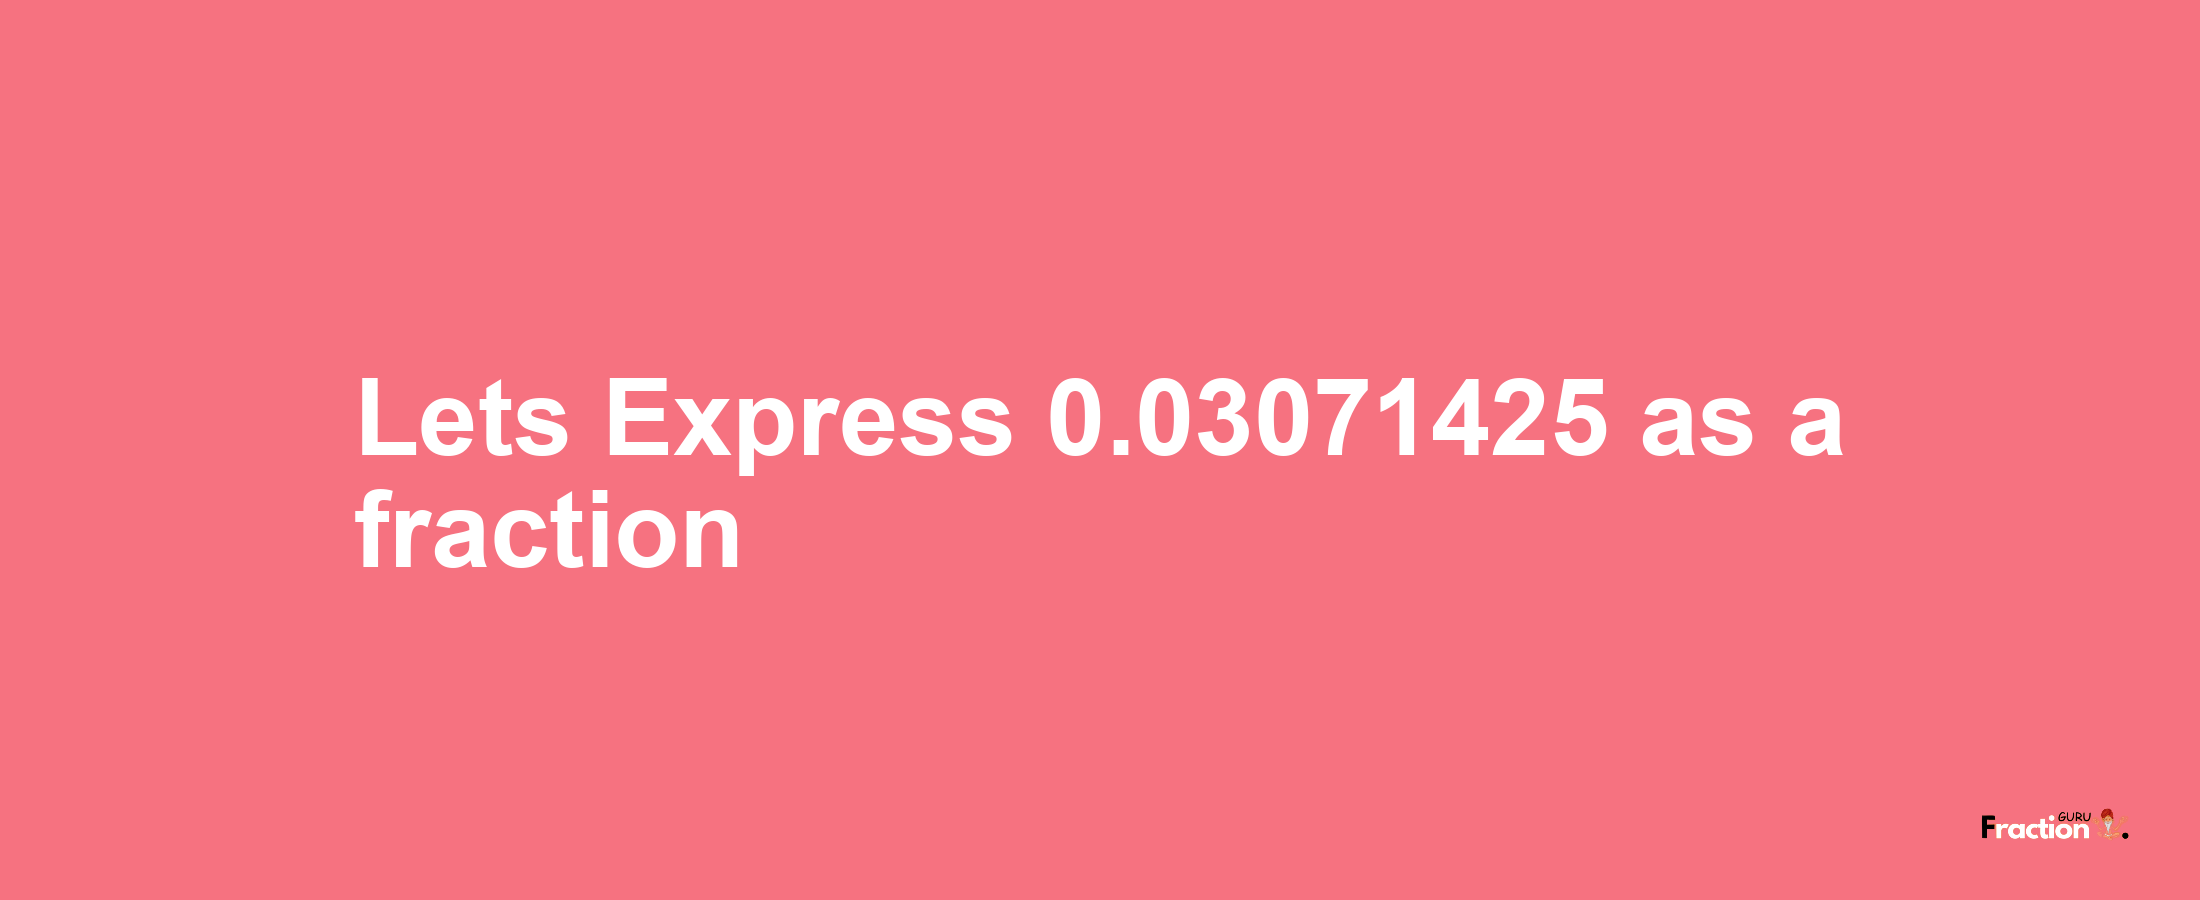 Lets Express 0.03071425 as afraction